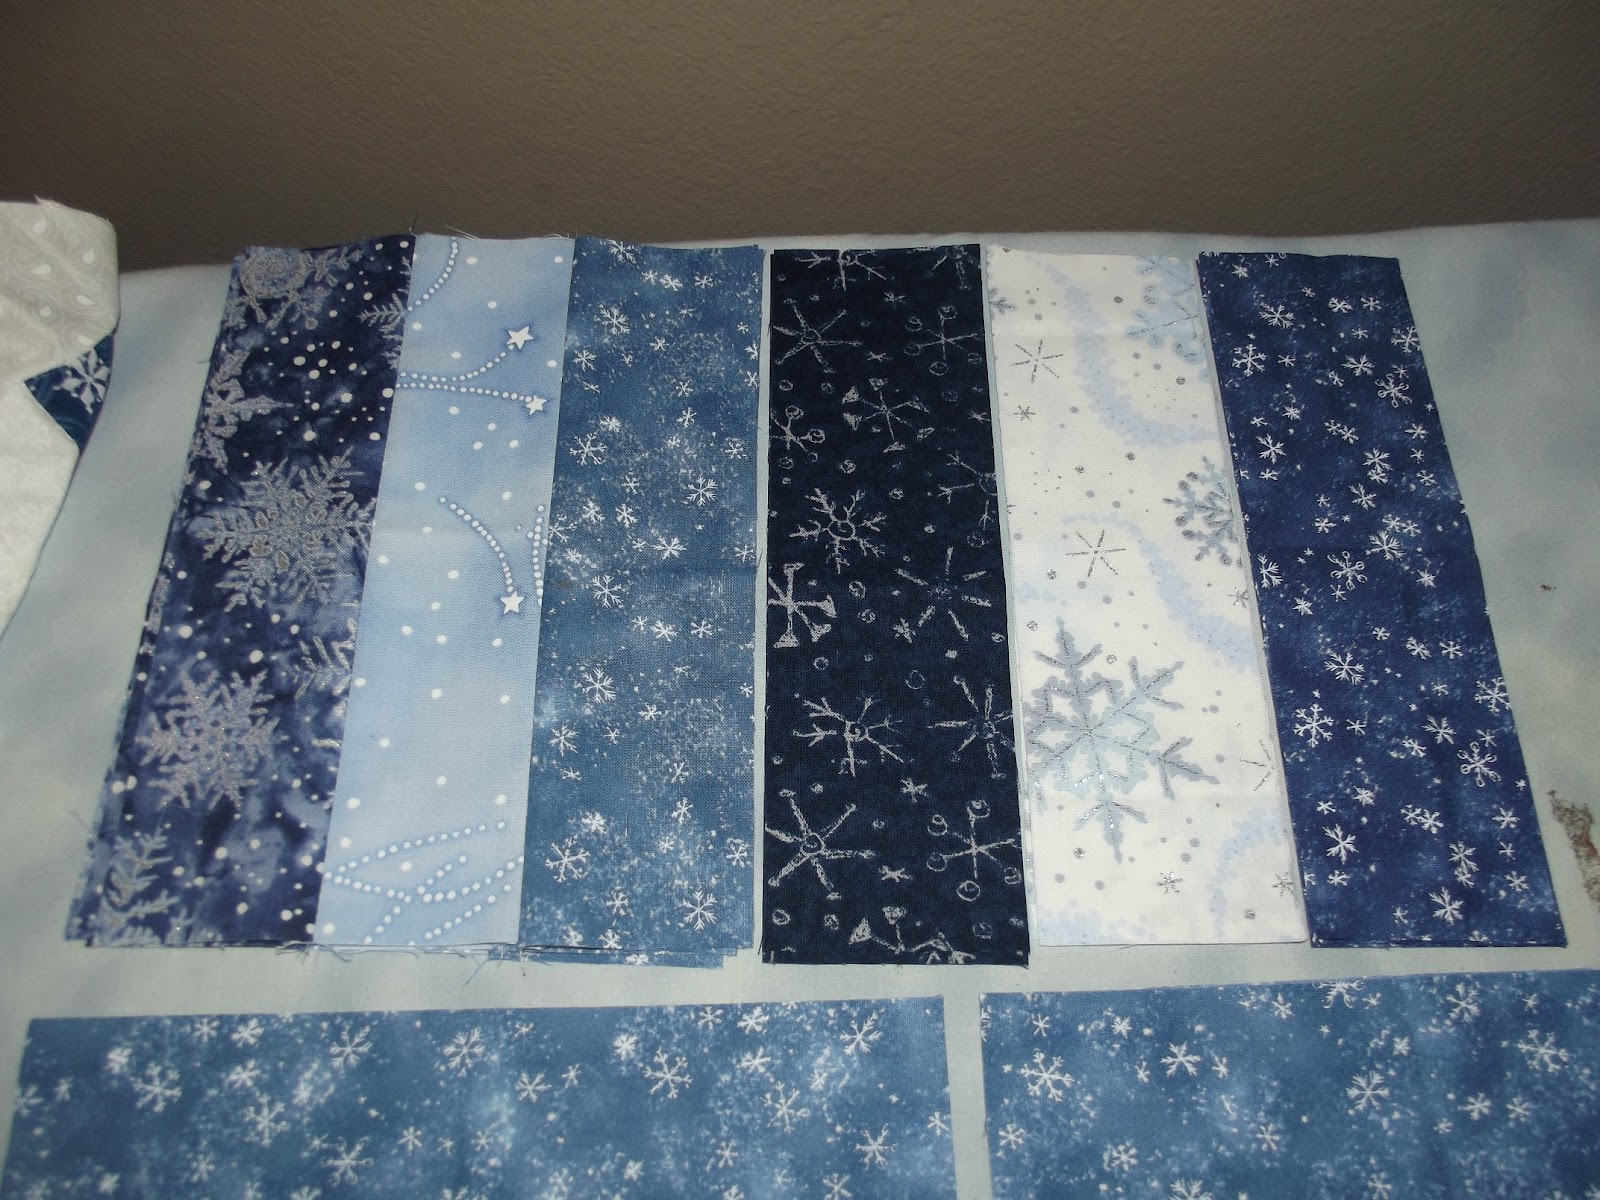 So . . . the borders on my Blue Stars quilt will have a deep navy blue ...